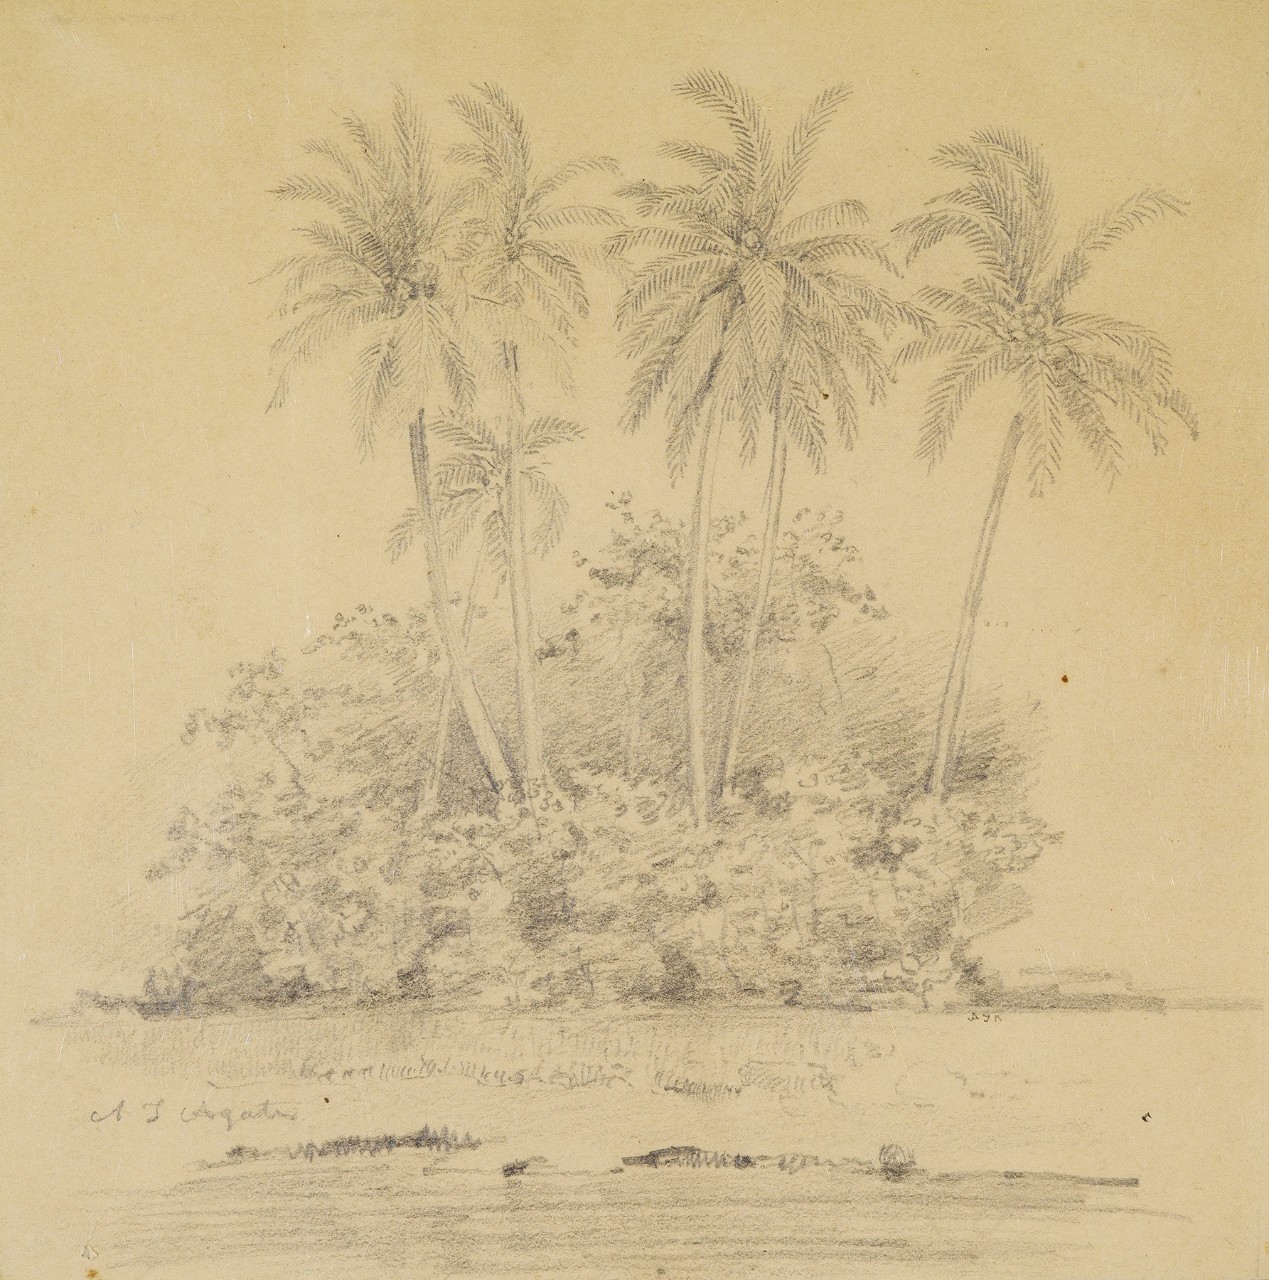 A group of palm trees 